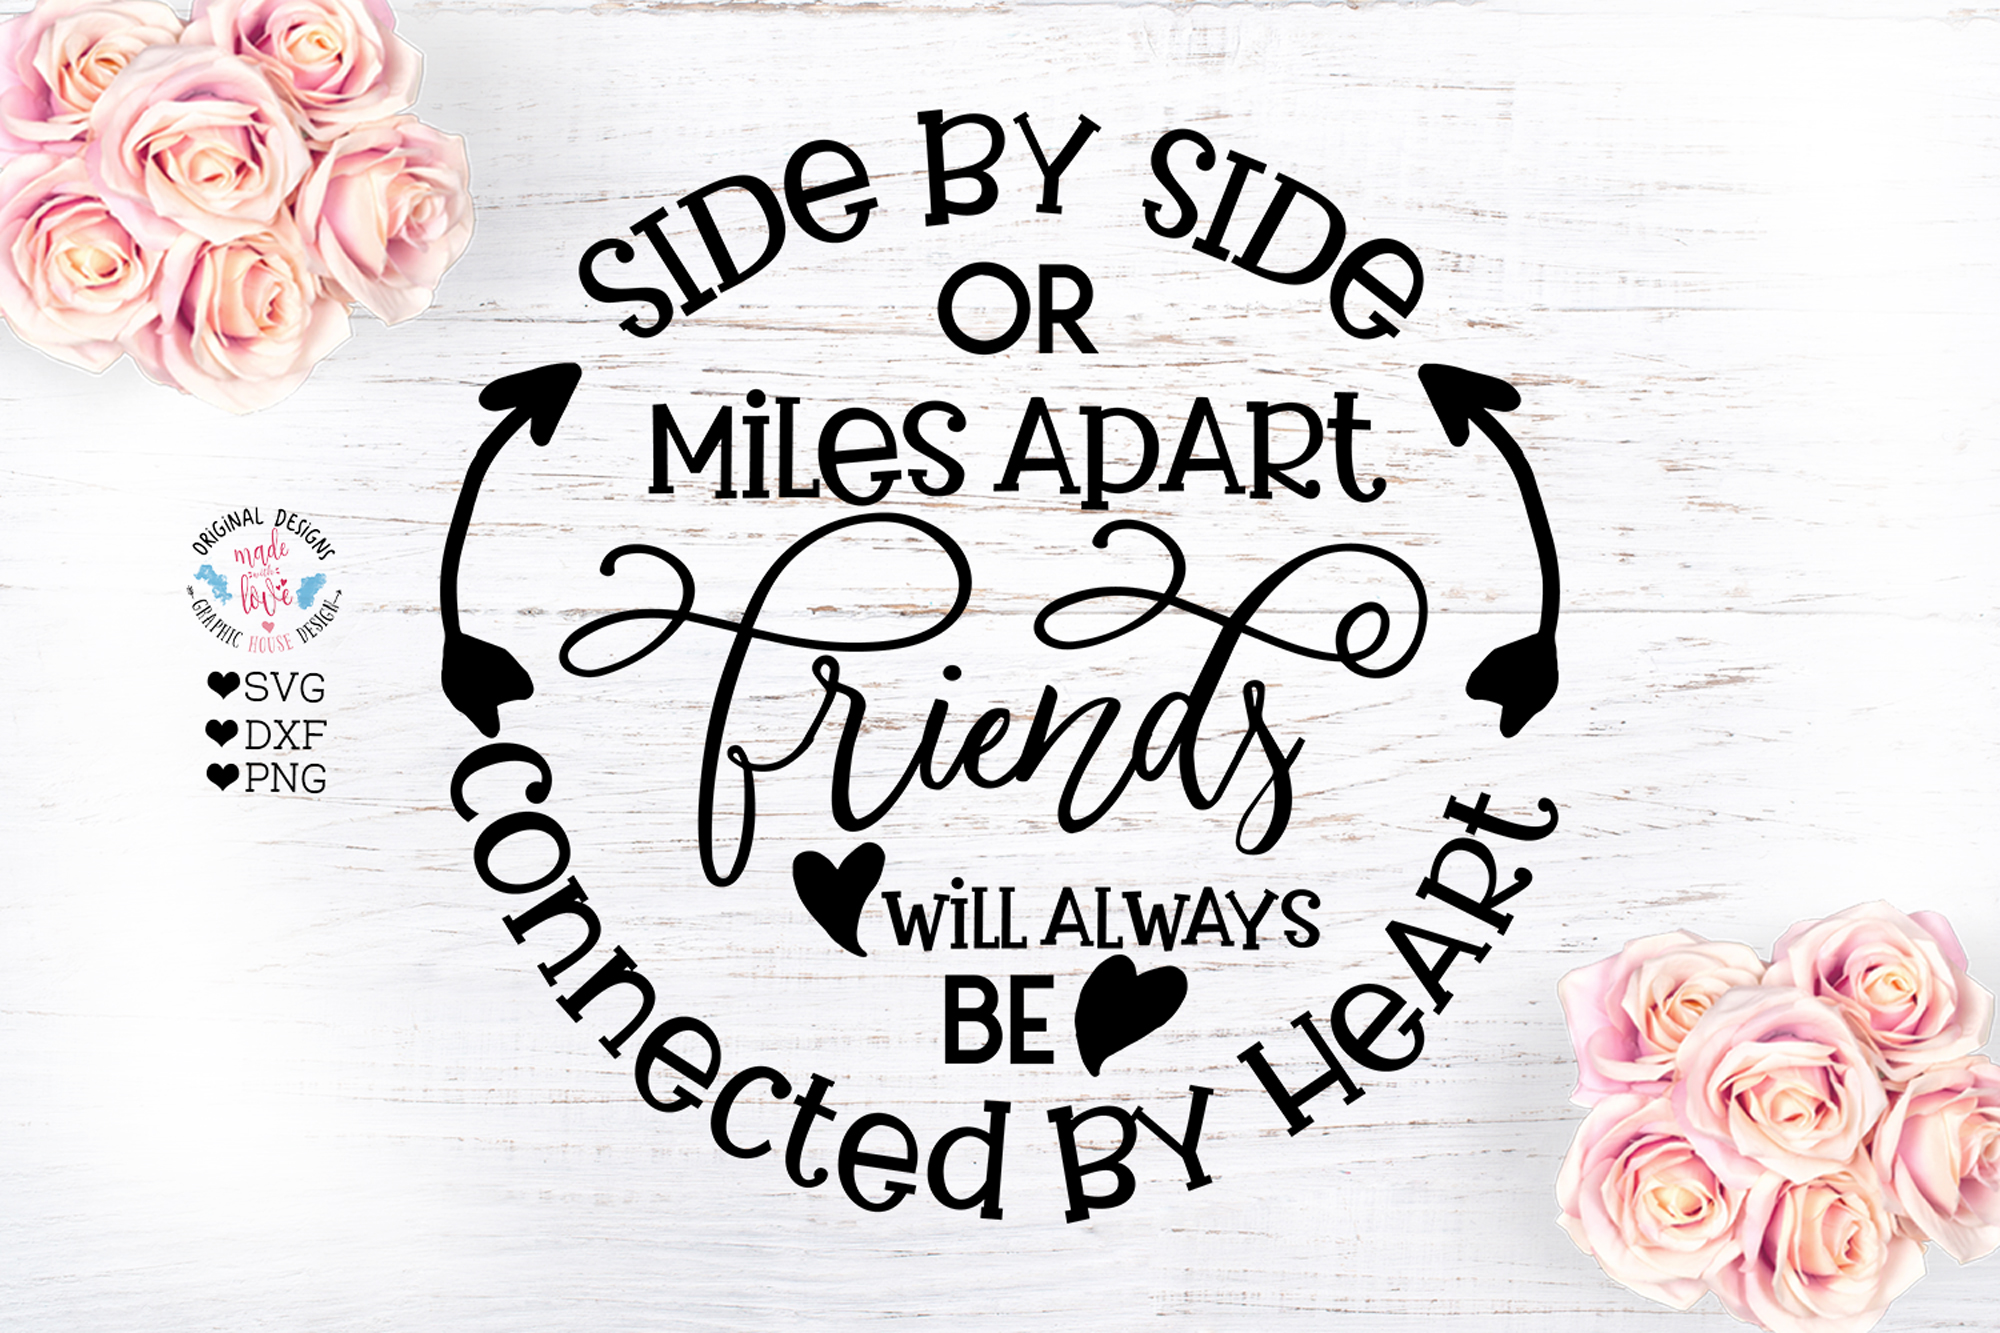 Download Friends will be Connected By Heart - Friendship Quote (295751) | SVGs | Design Bundles